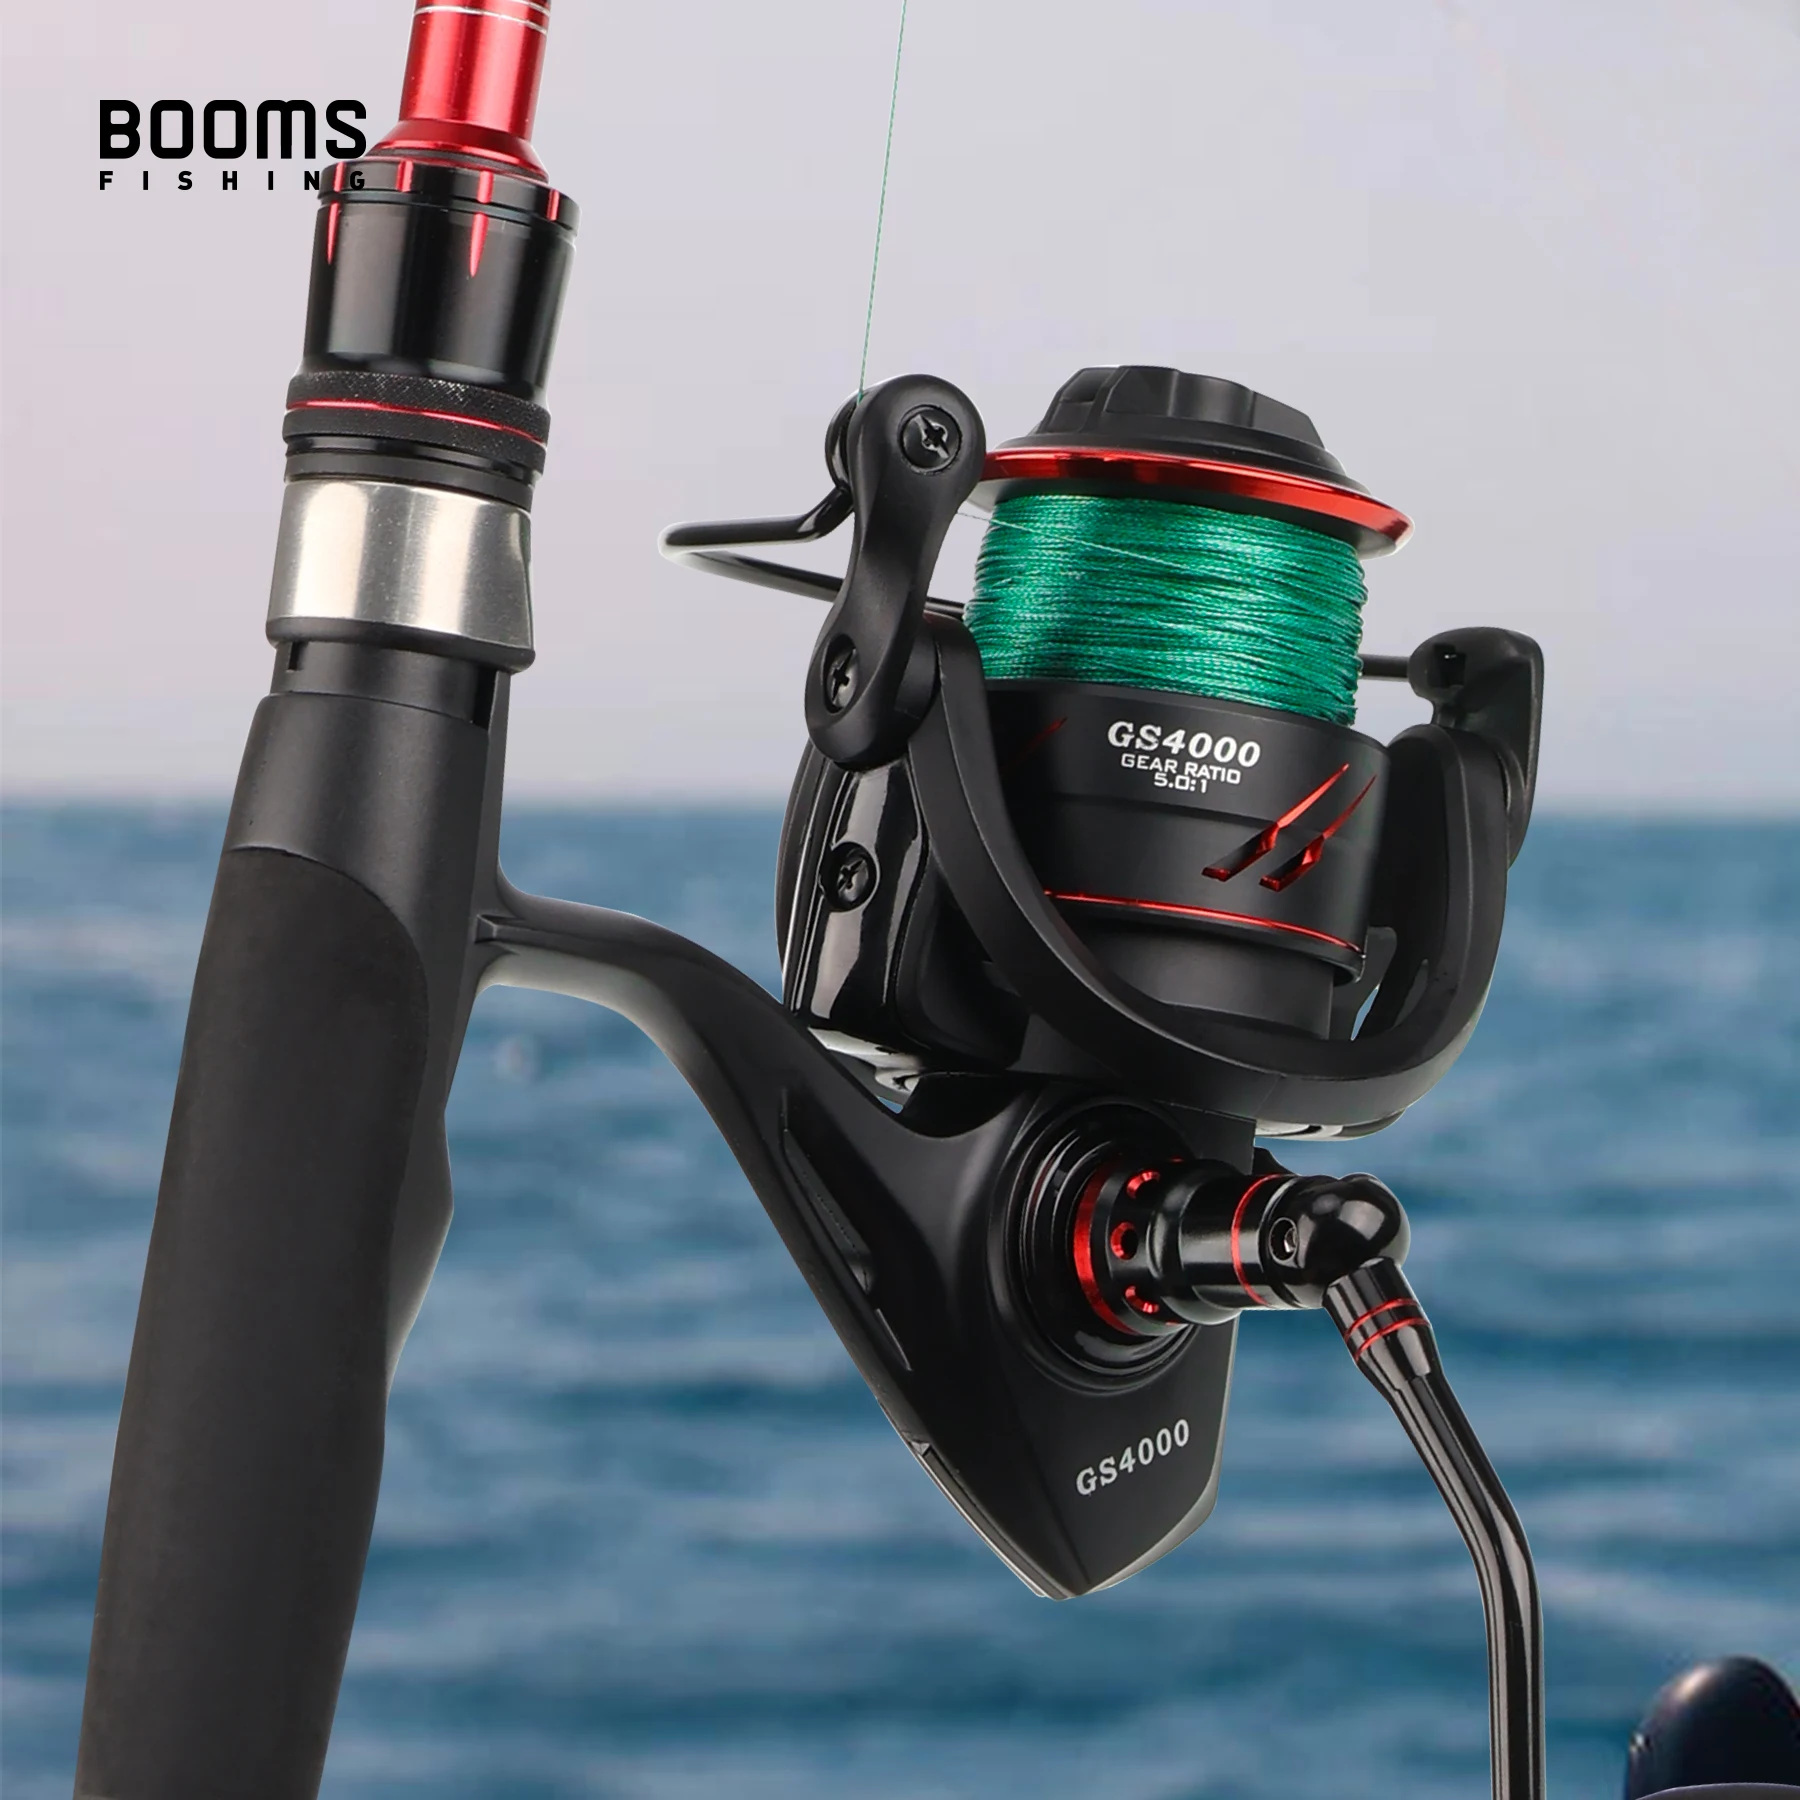  Booms Fishing RC1 Neoprene Reel Cover, Round